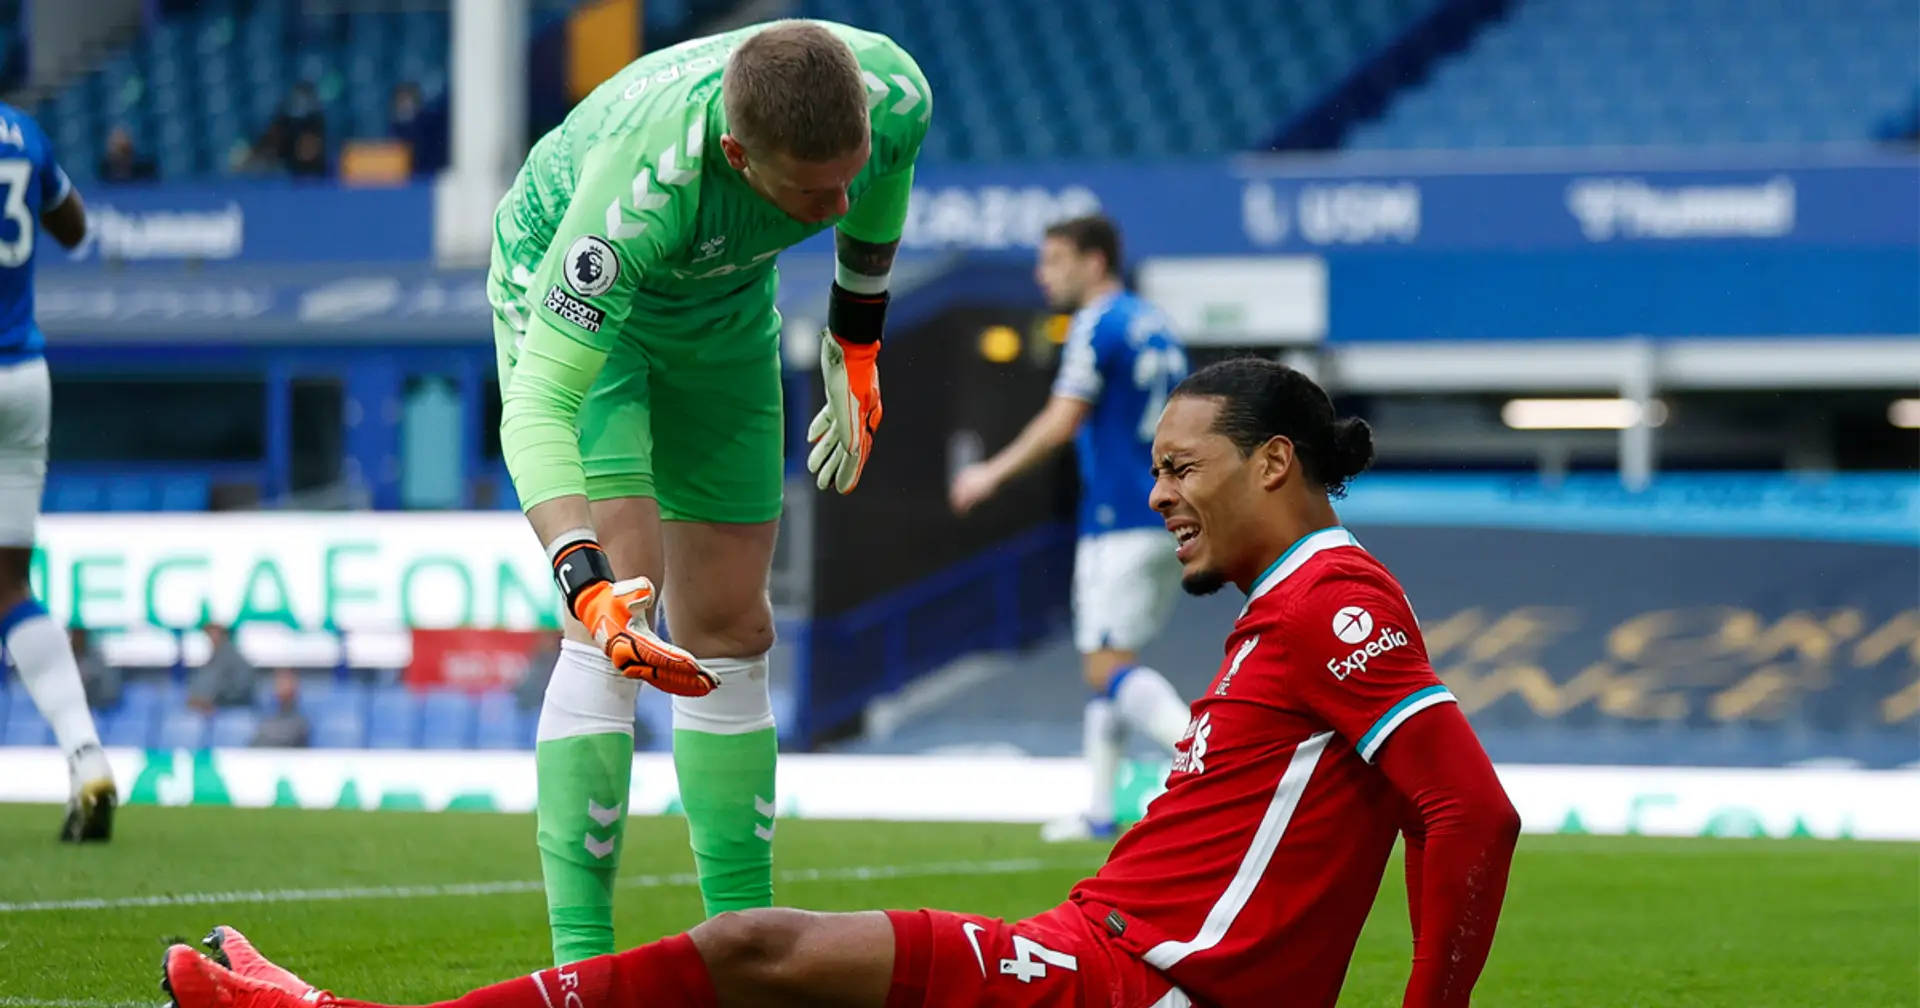 'This is an absolutely disastrous tackle': So'ton boss Hasenhuttl blasts Pickford for injuring Van Dijk